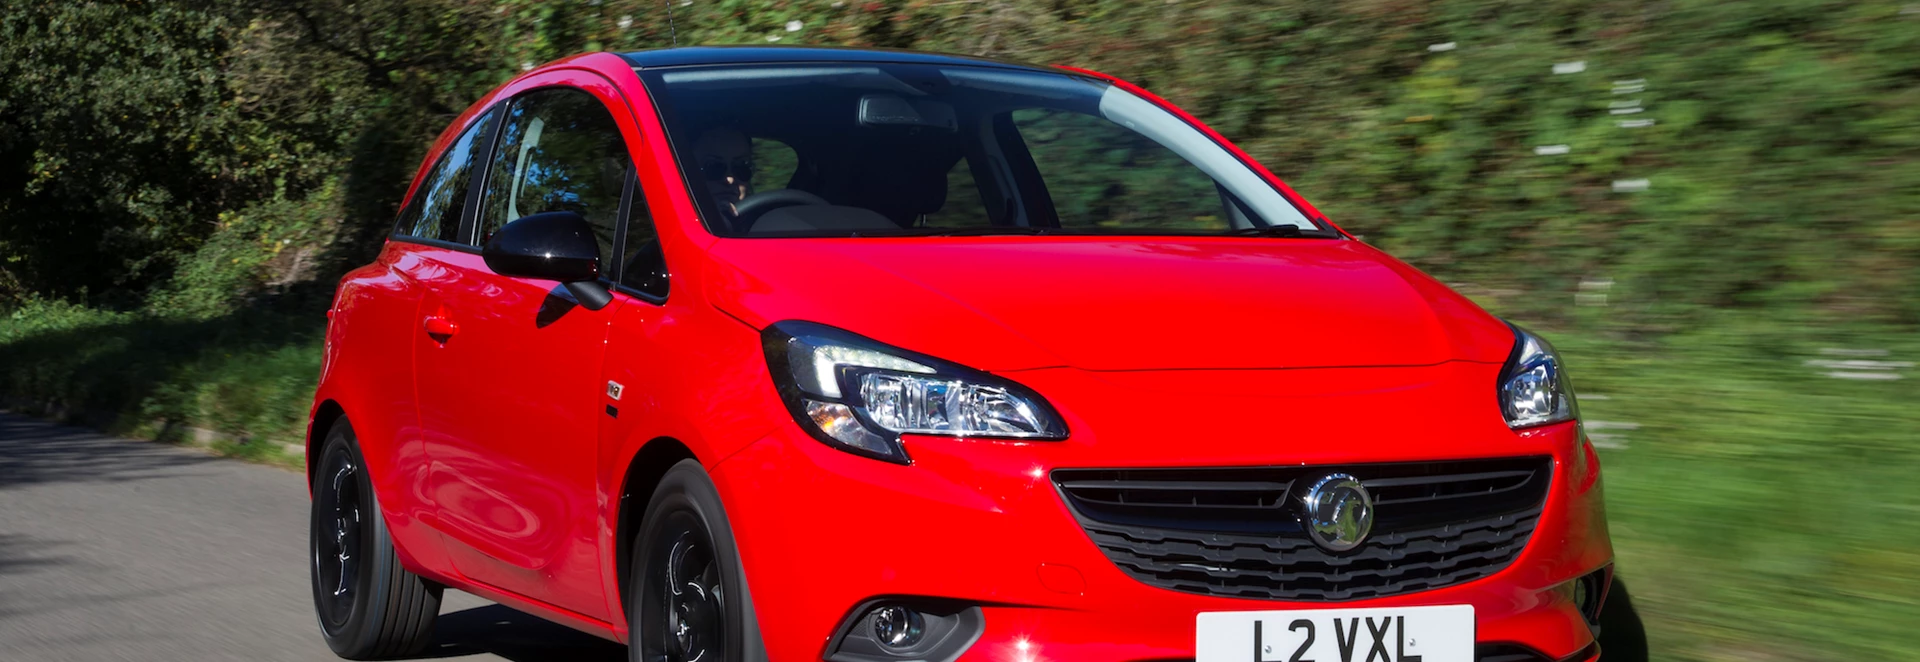 Vauxhall tops Scottish sales charts for March 